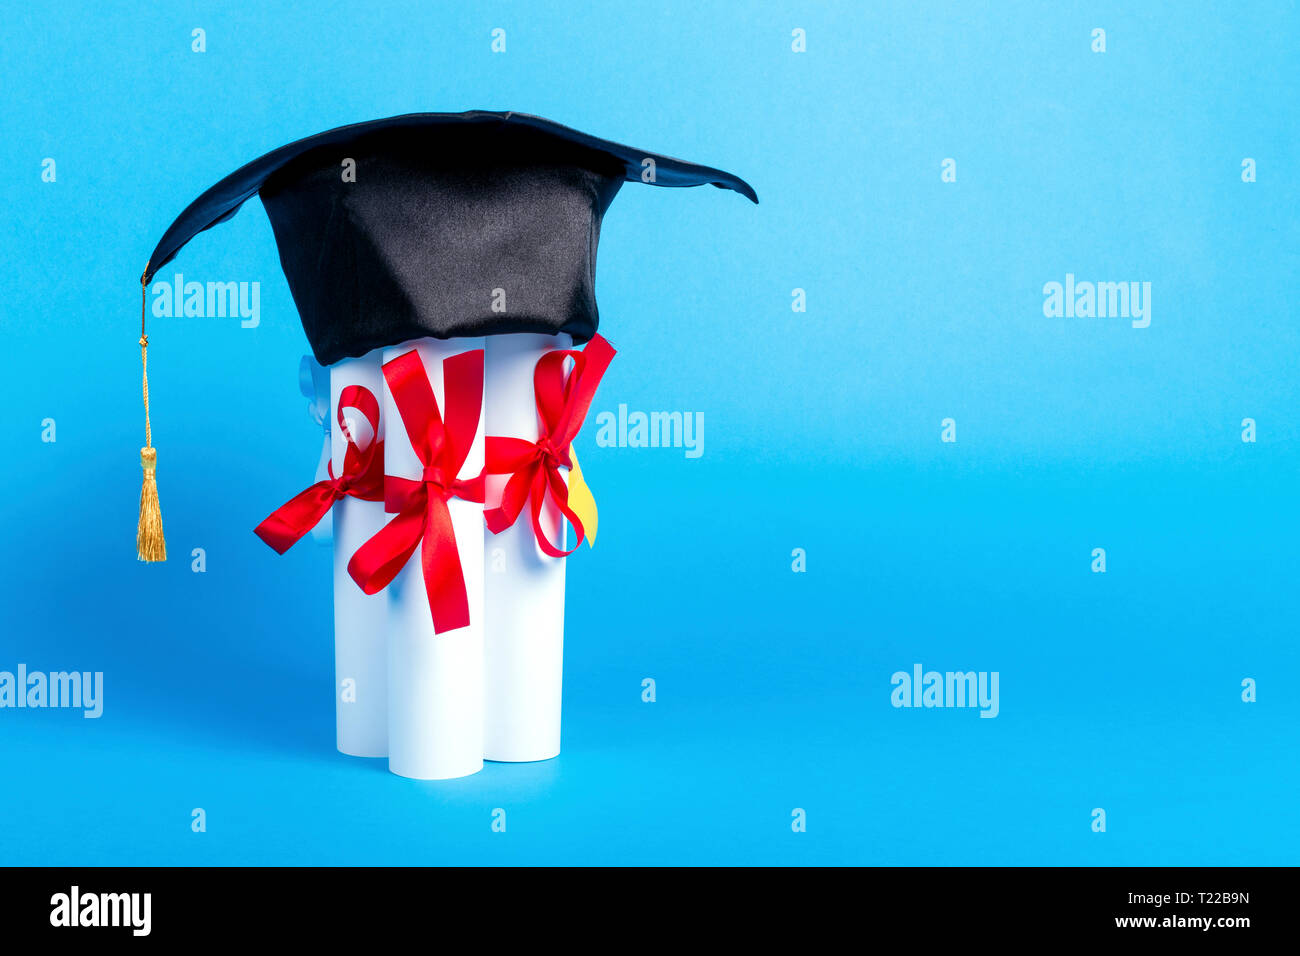 graduation cap on diplomas, image on blue background with copy space Stock Photo